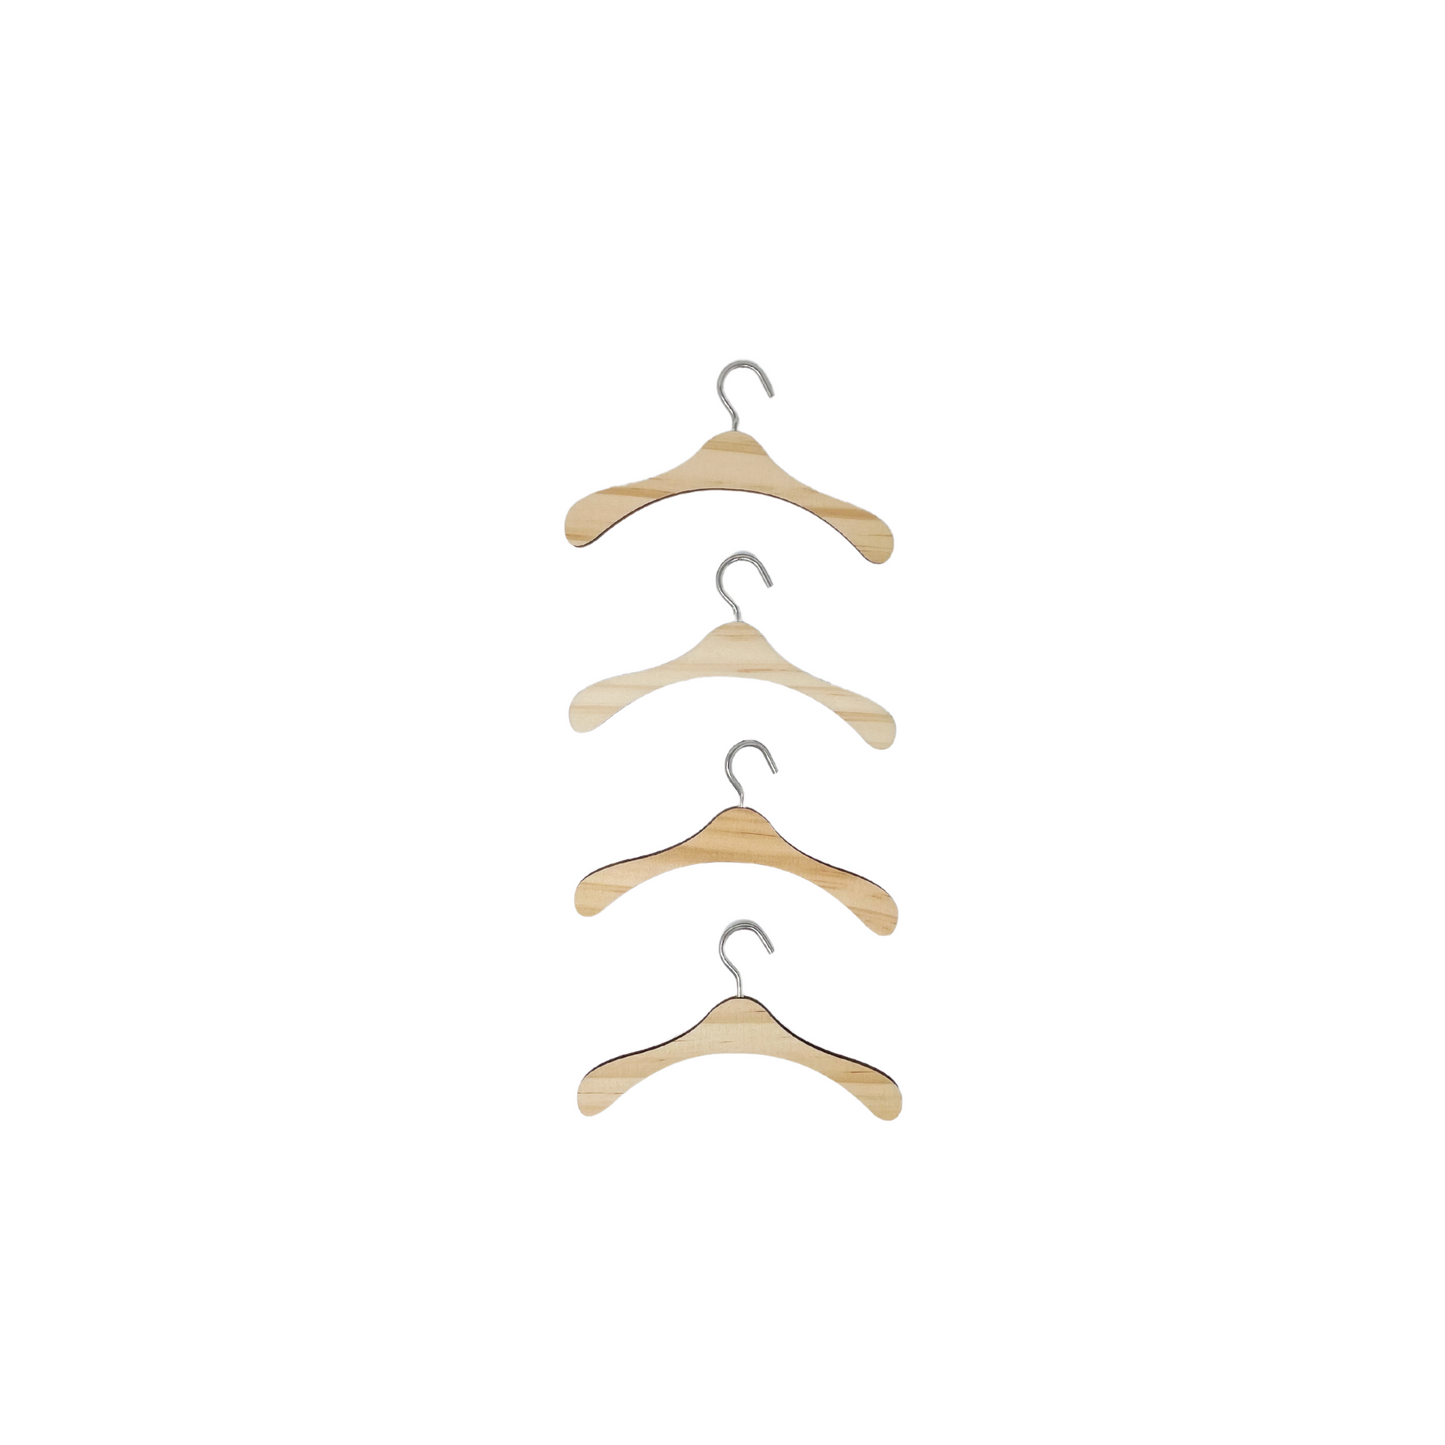 Wooden Doll Clothing Rack with Miniature Hangers